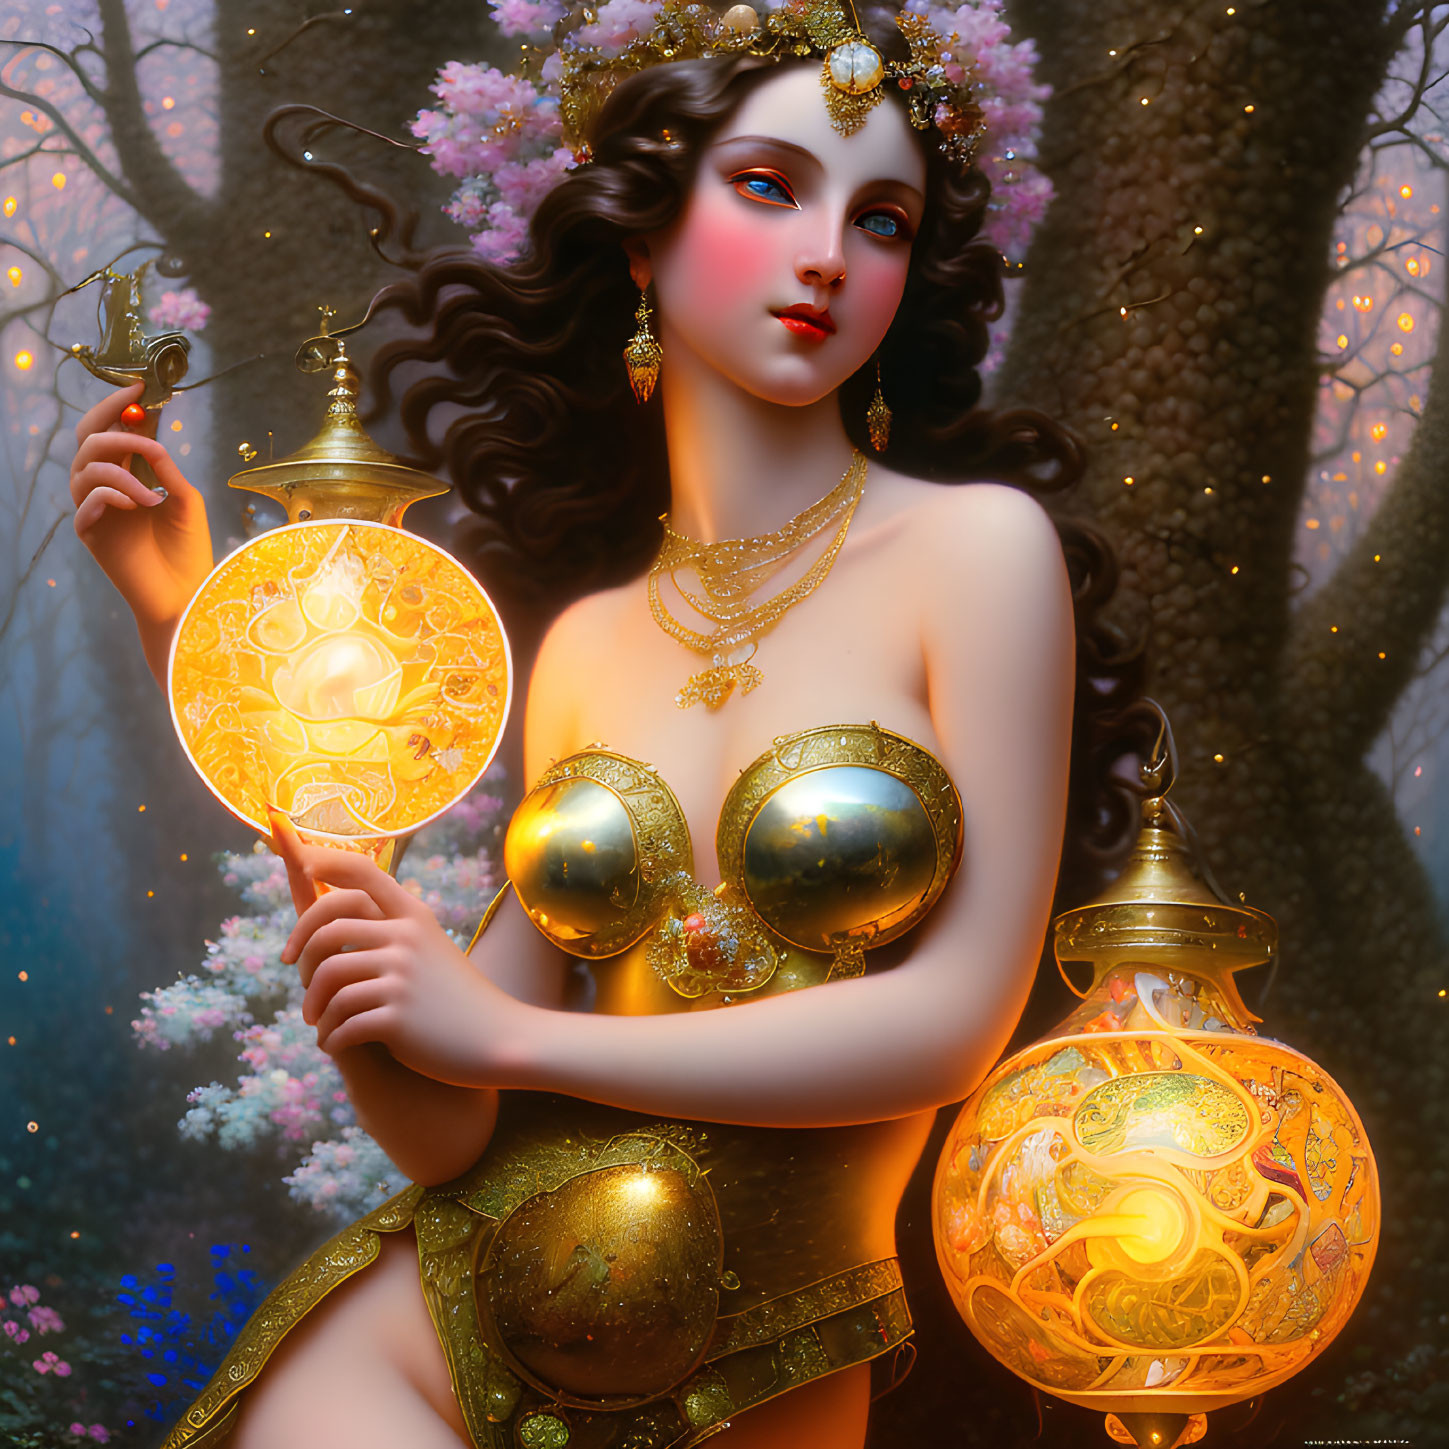 Fantastical female figure with flower crown and ornate lamps in mystical forest